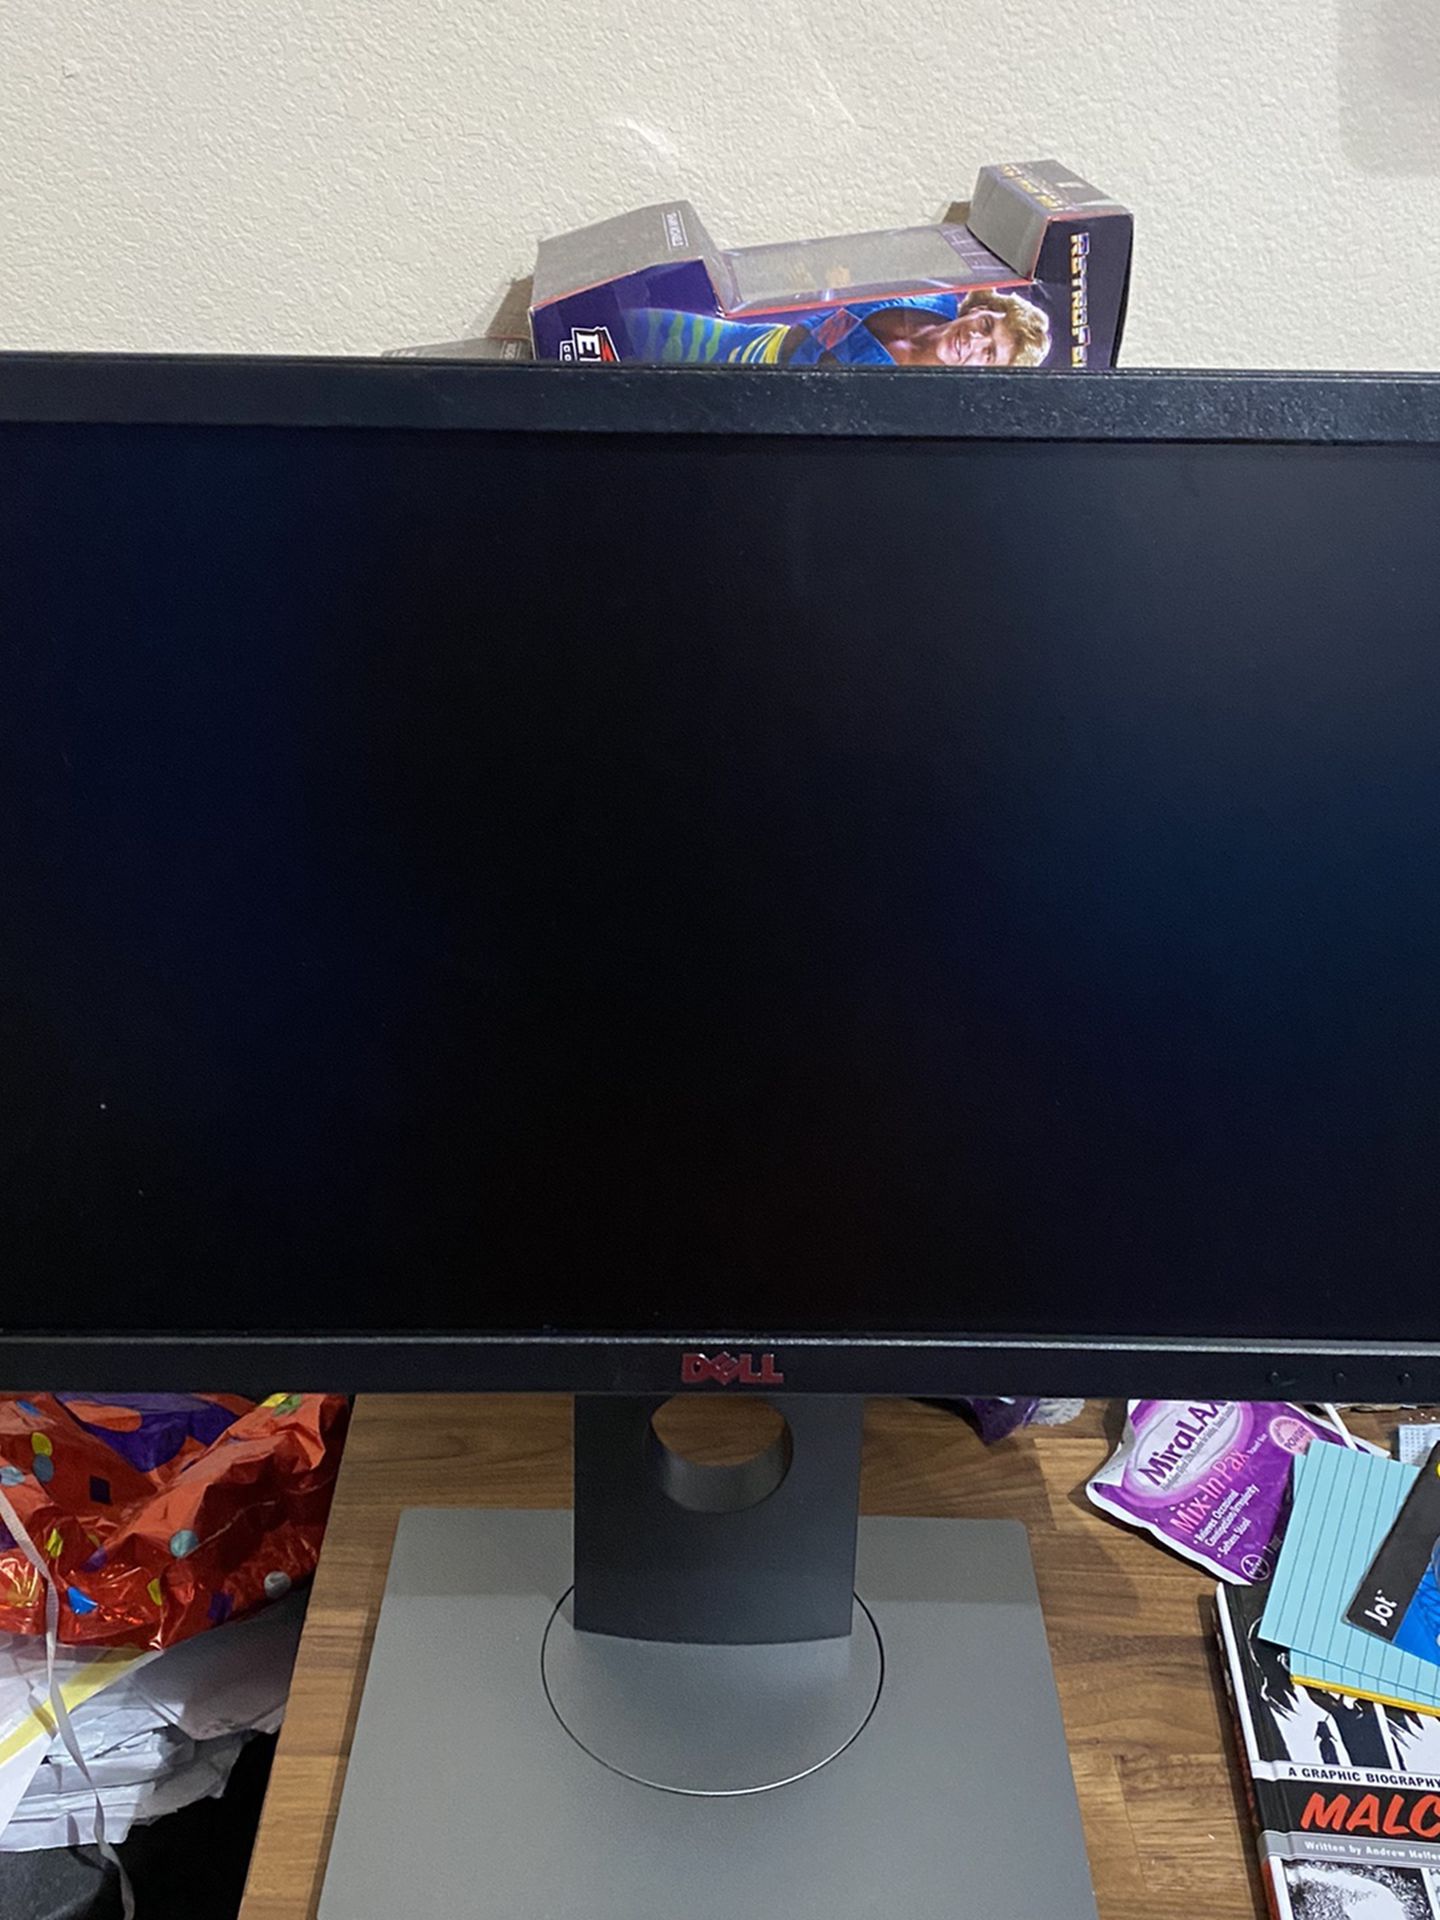 (SUPER-DEAL) 20-inch Widescreen Monitor. Perfect for students or people working from home